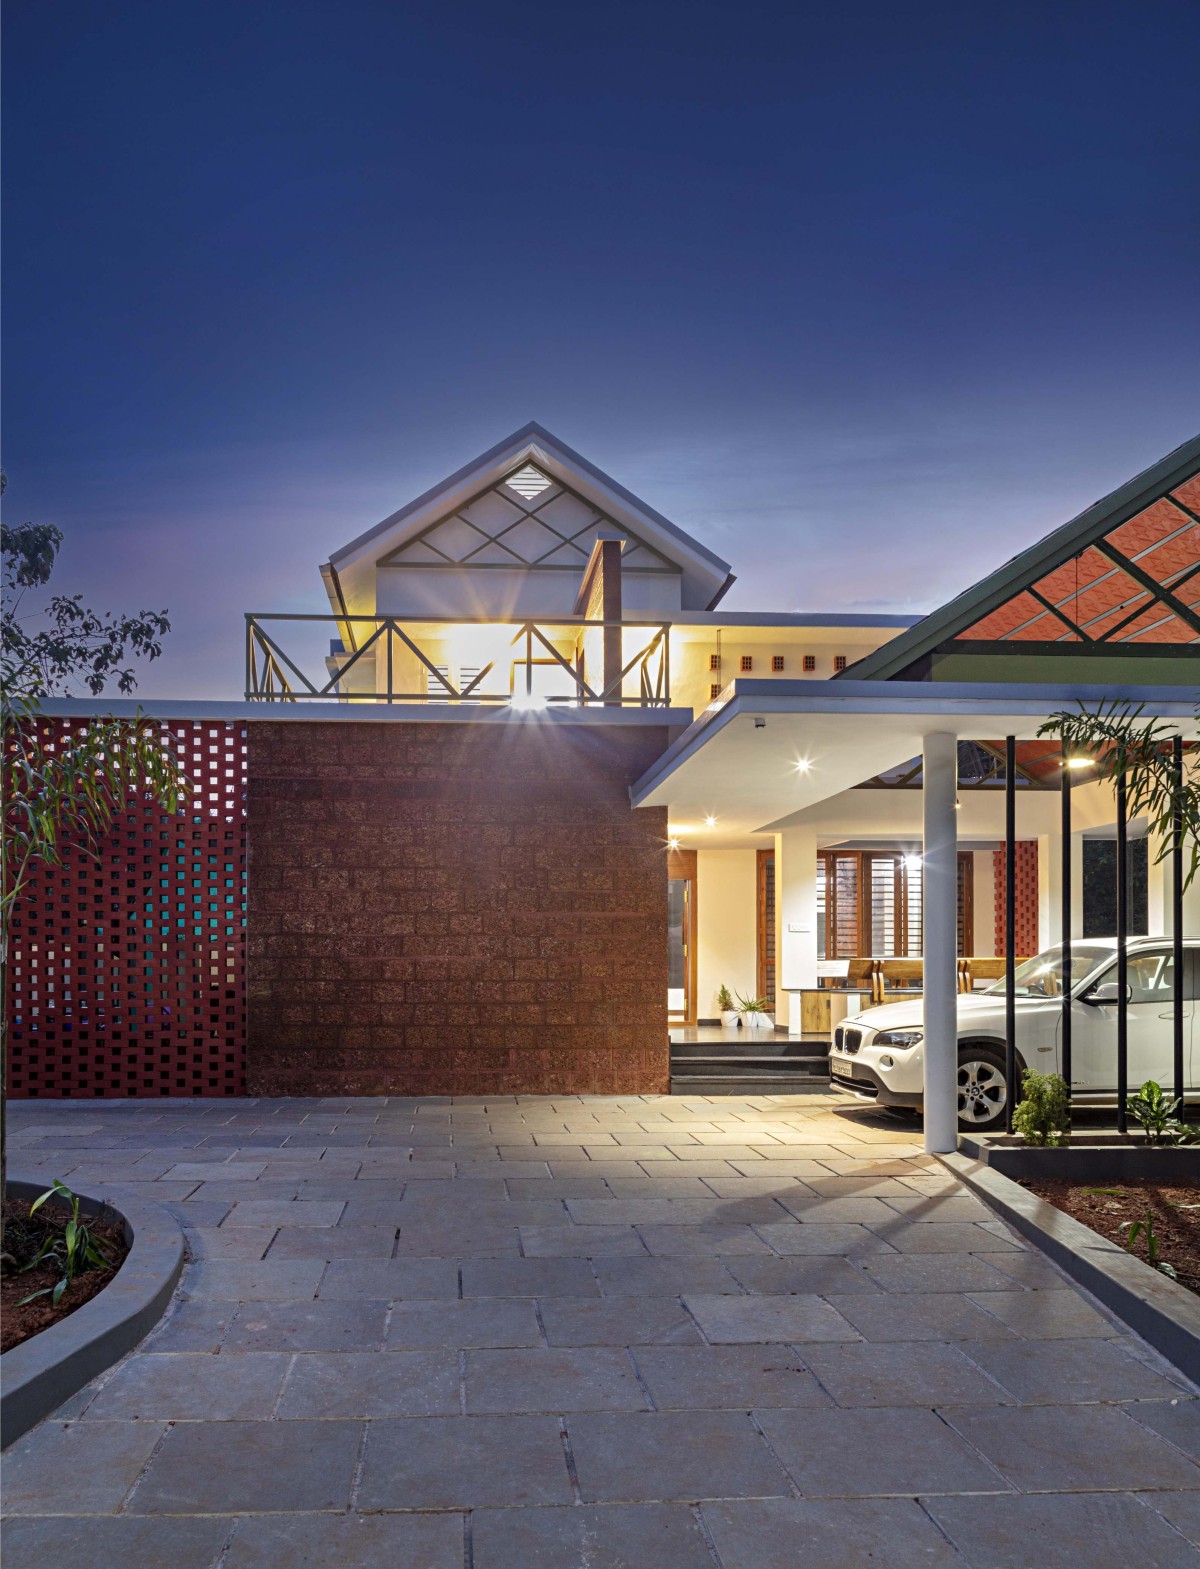 Exterior view of Customary Rapport by Nestcraft Architecture